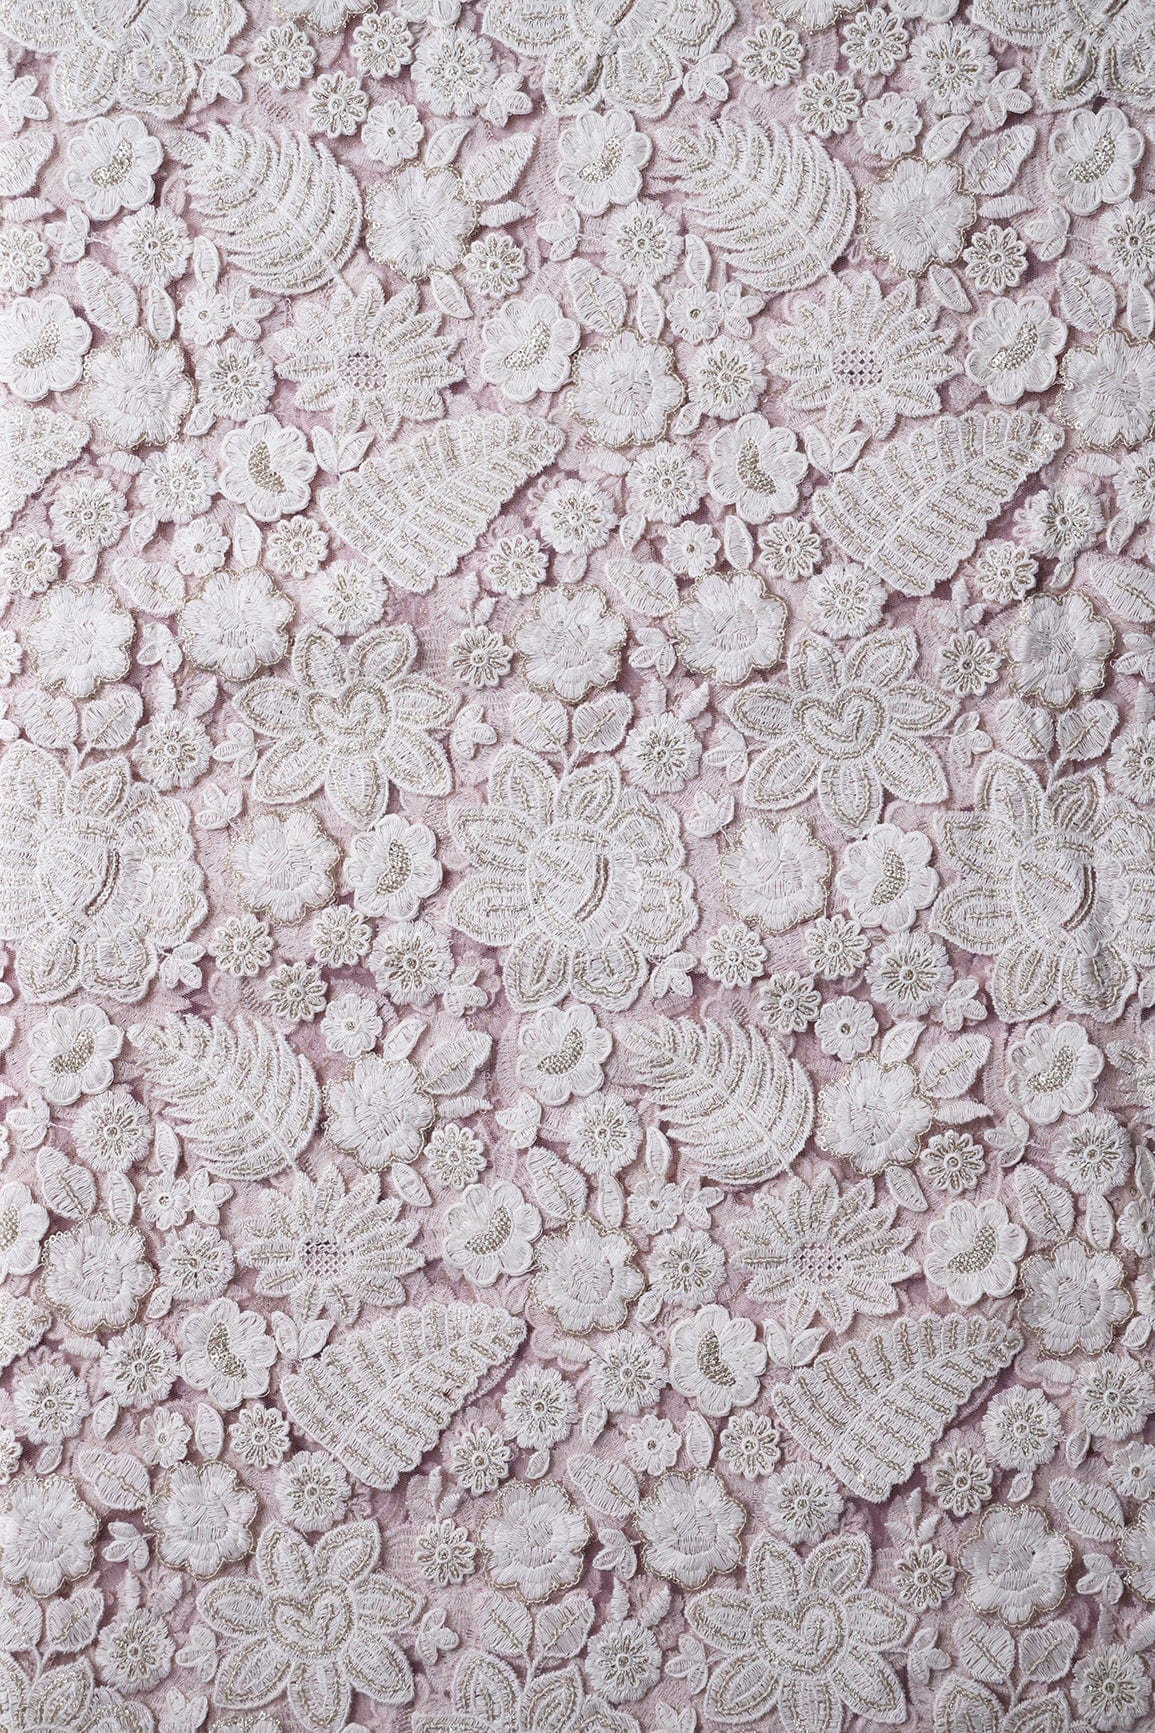 White Thread With Sequins Heavy Floral Embroidery On Lilac Purple Soft Net Fabric - doeraa